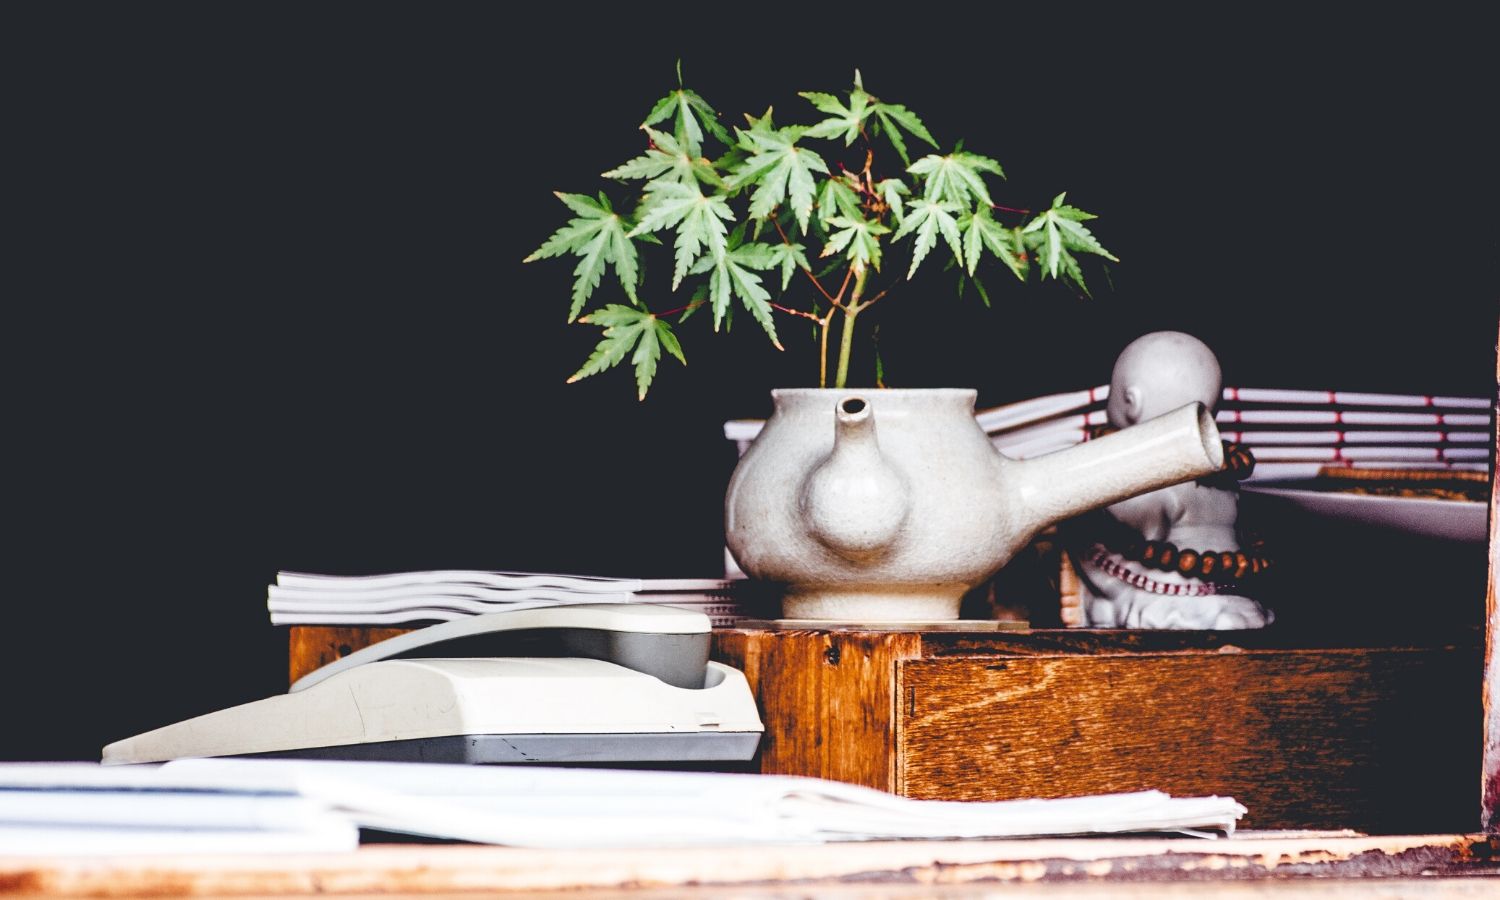 Cannabis placed decoratively on a desk among books.